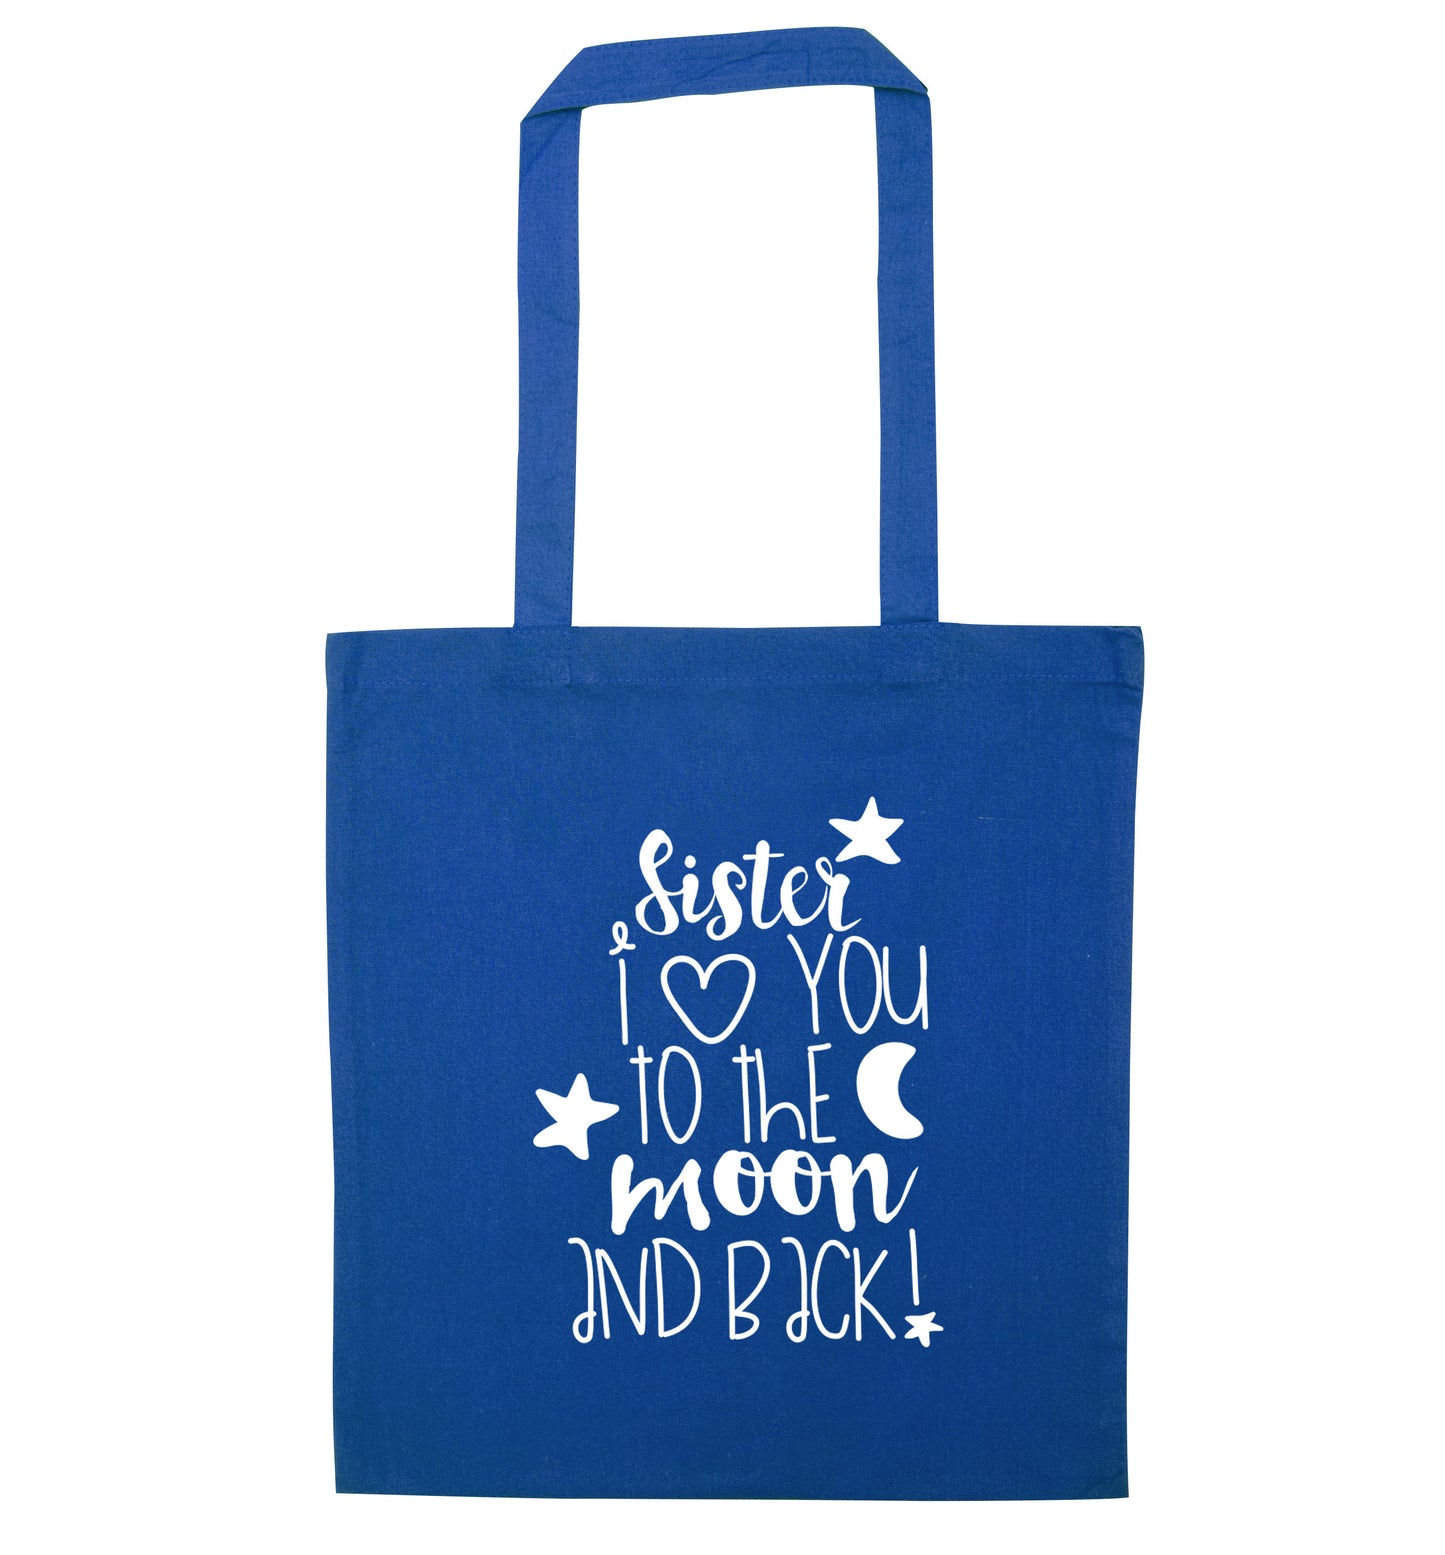 Sister I love you to the moon and back blue tote bag